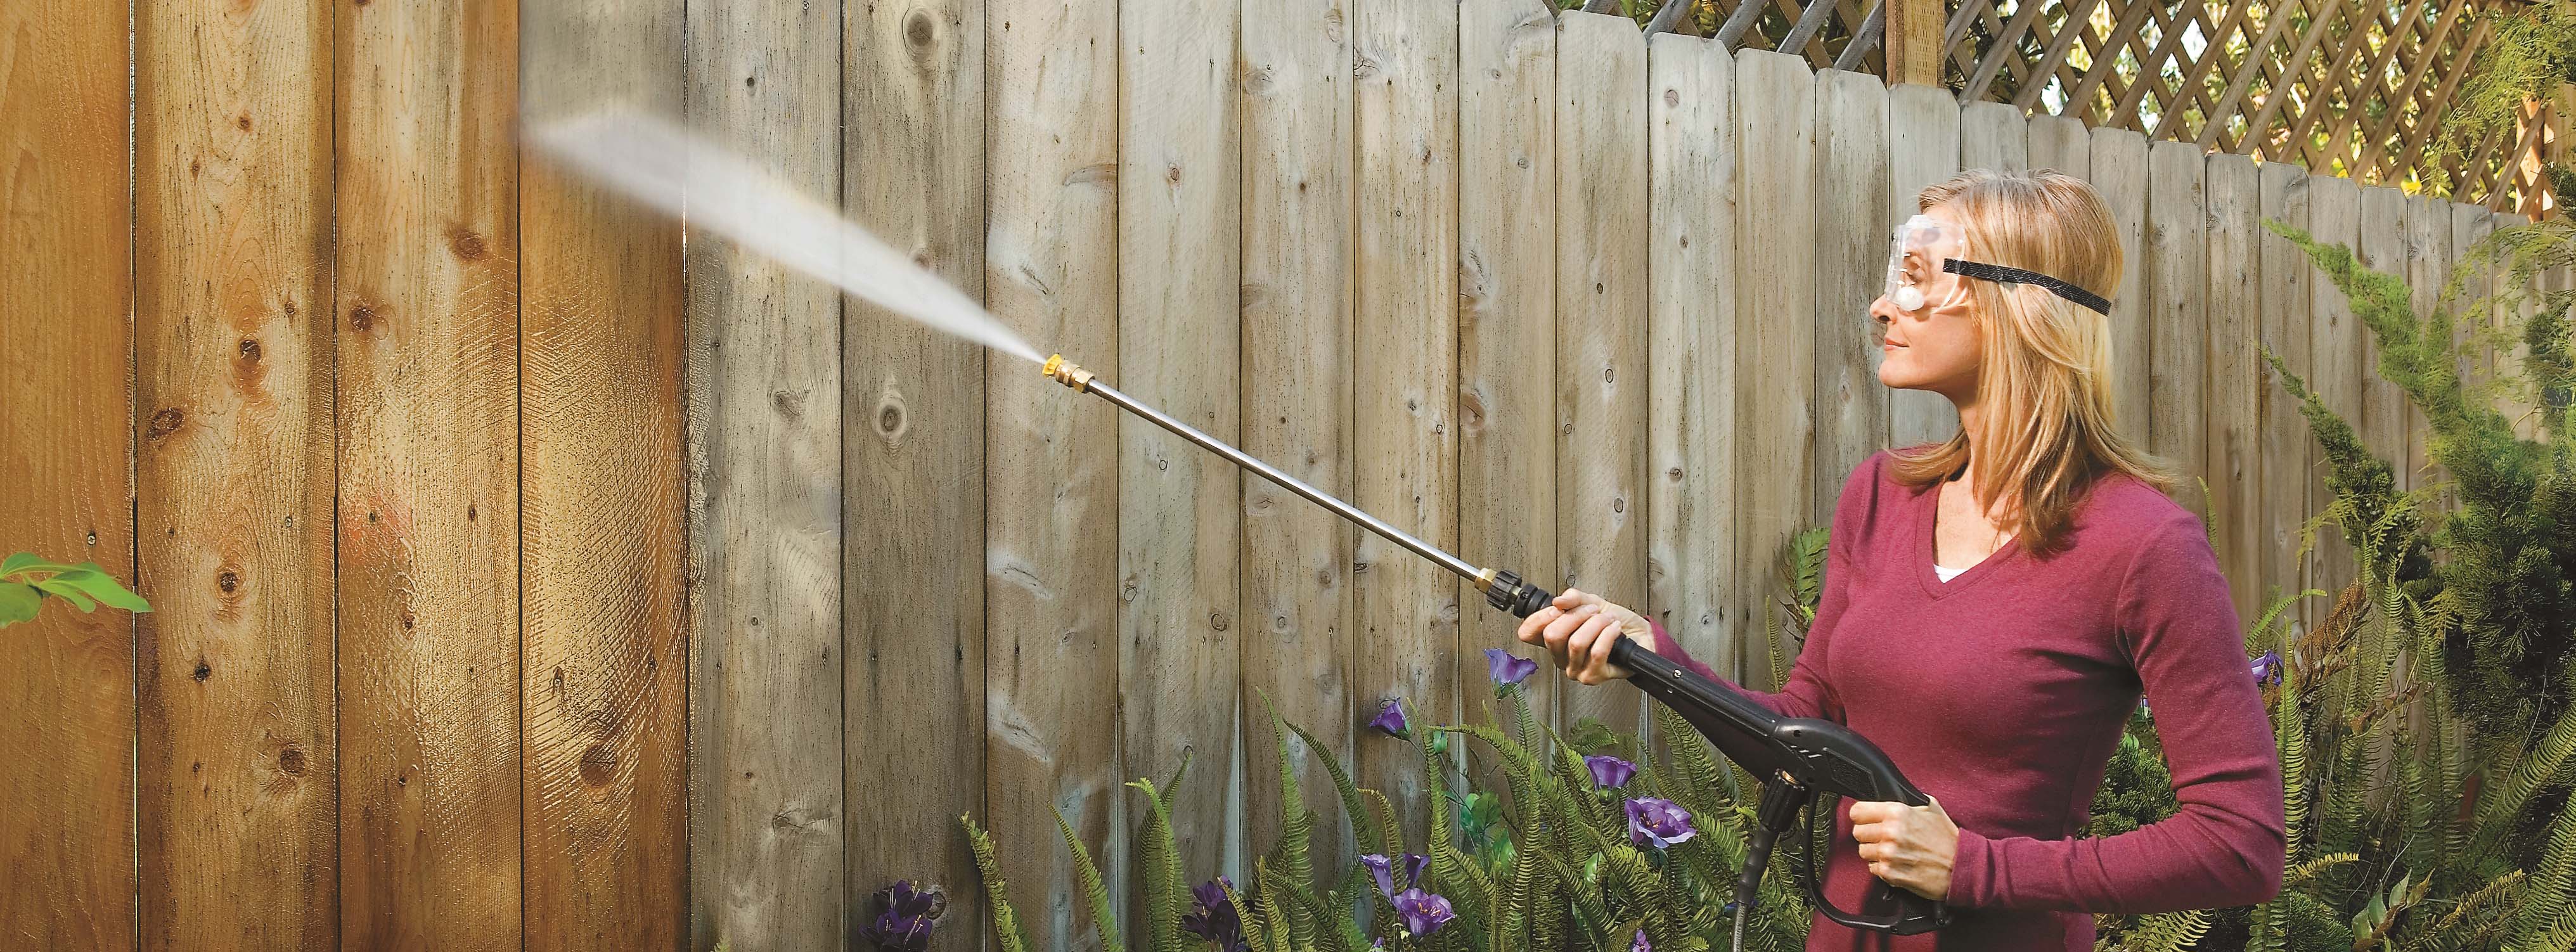 Woman Cleaning Fence With Pressure Washer